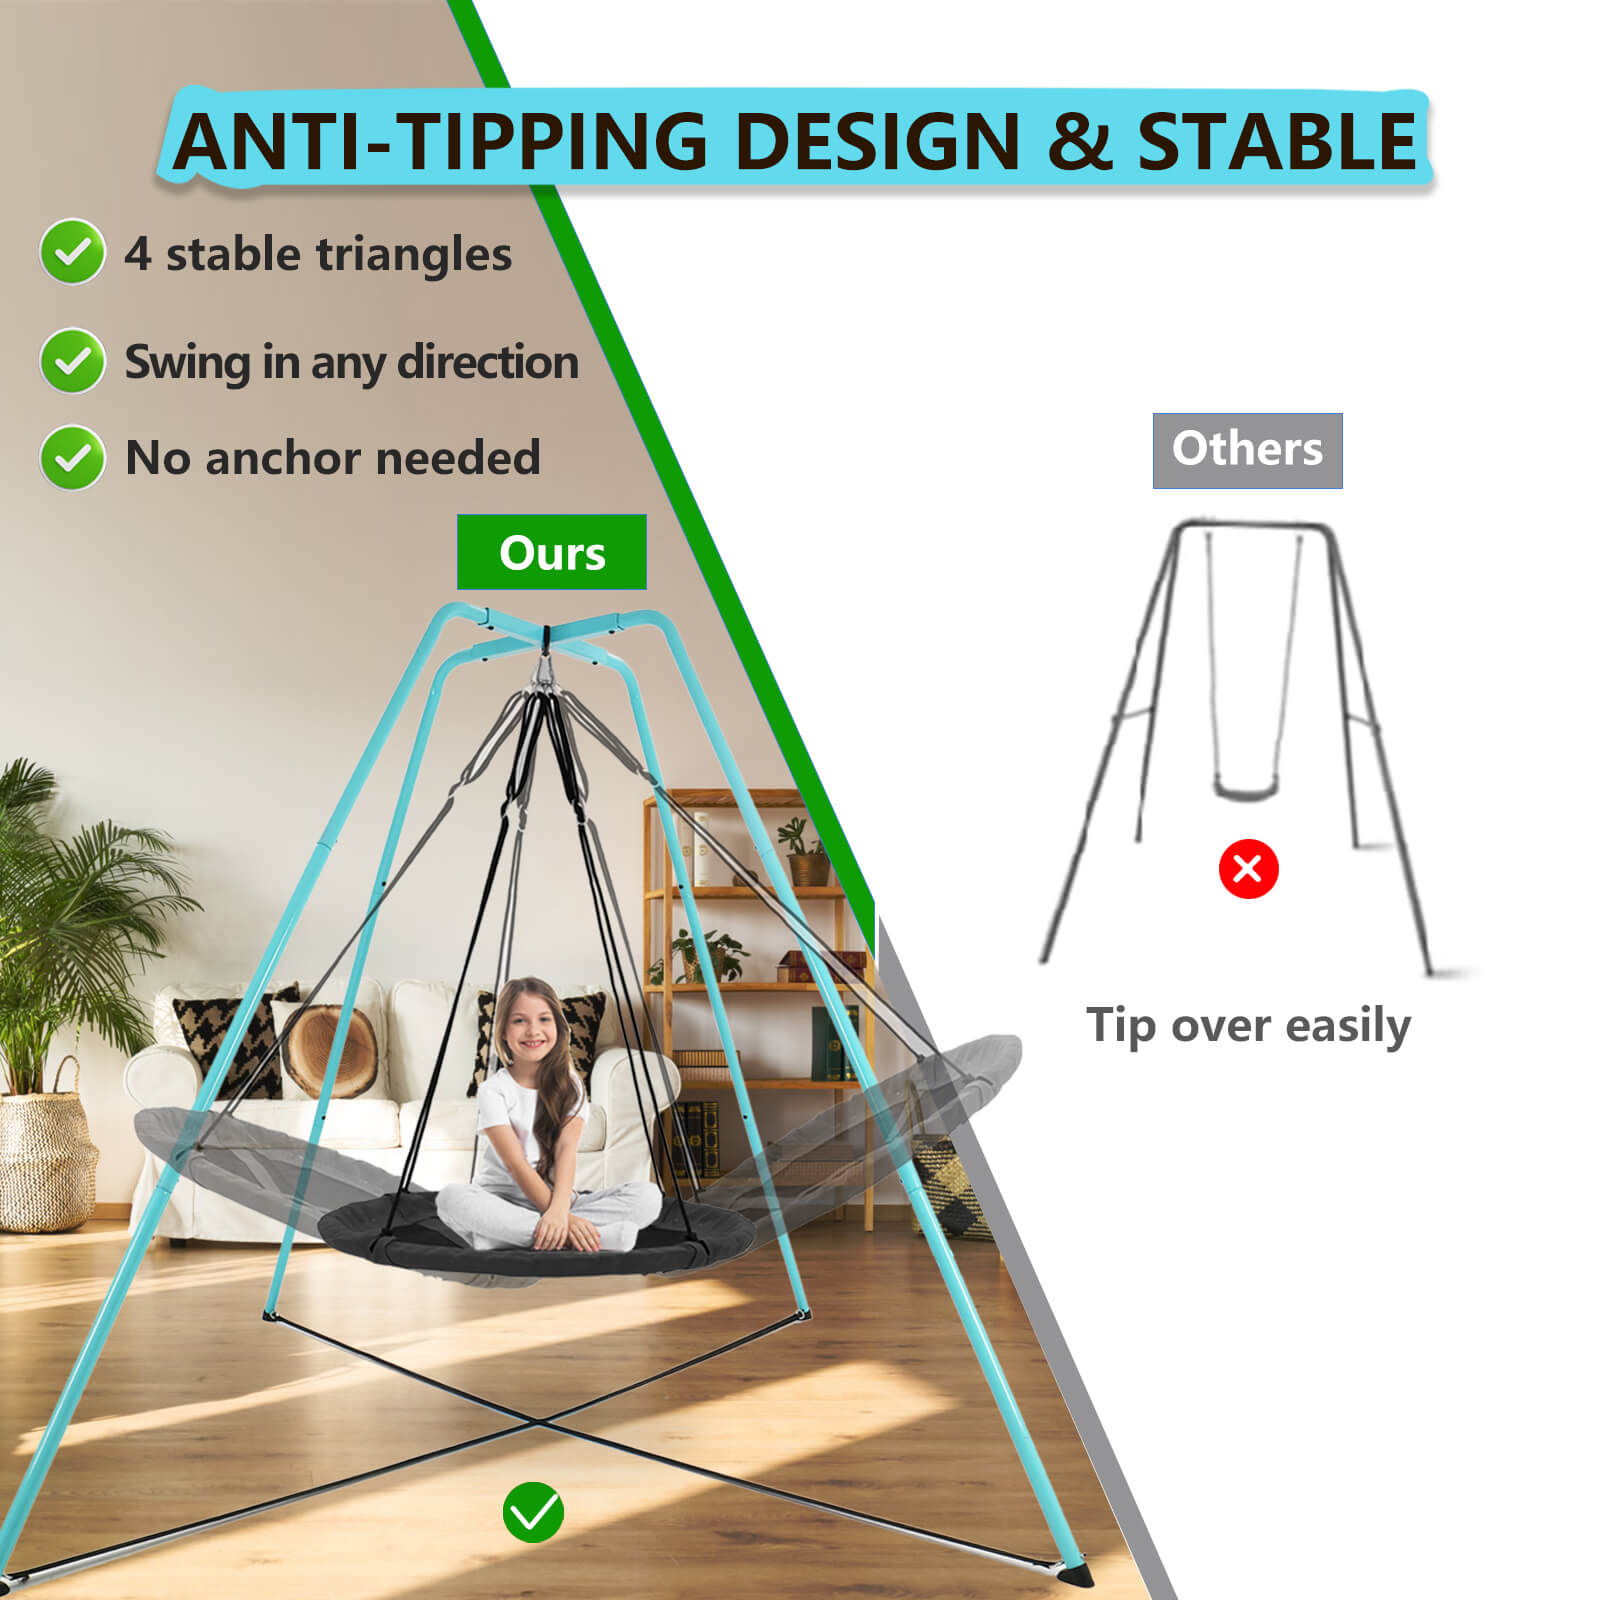 Skybound swing frame supports swings to sway in all directions – unlike traditional swings that only move back and forth. The image indicates: 4 stable triangles, Swing in any direction, No anchor needed.